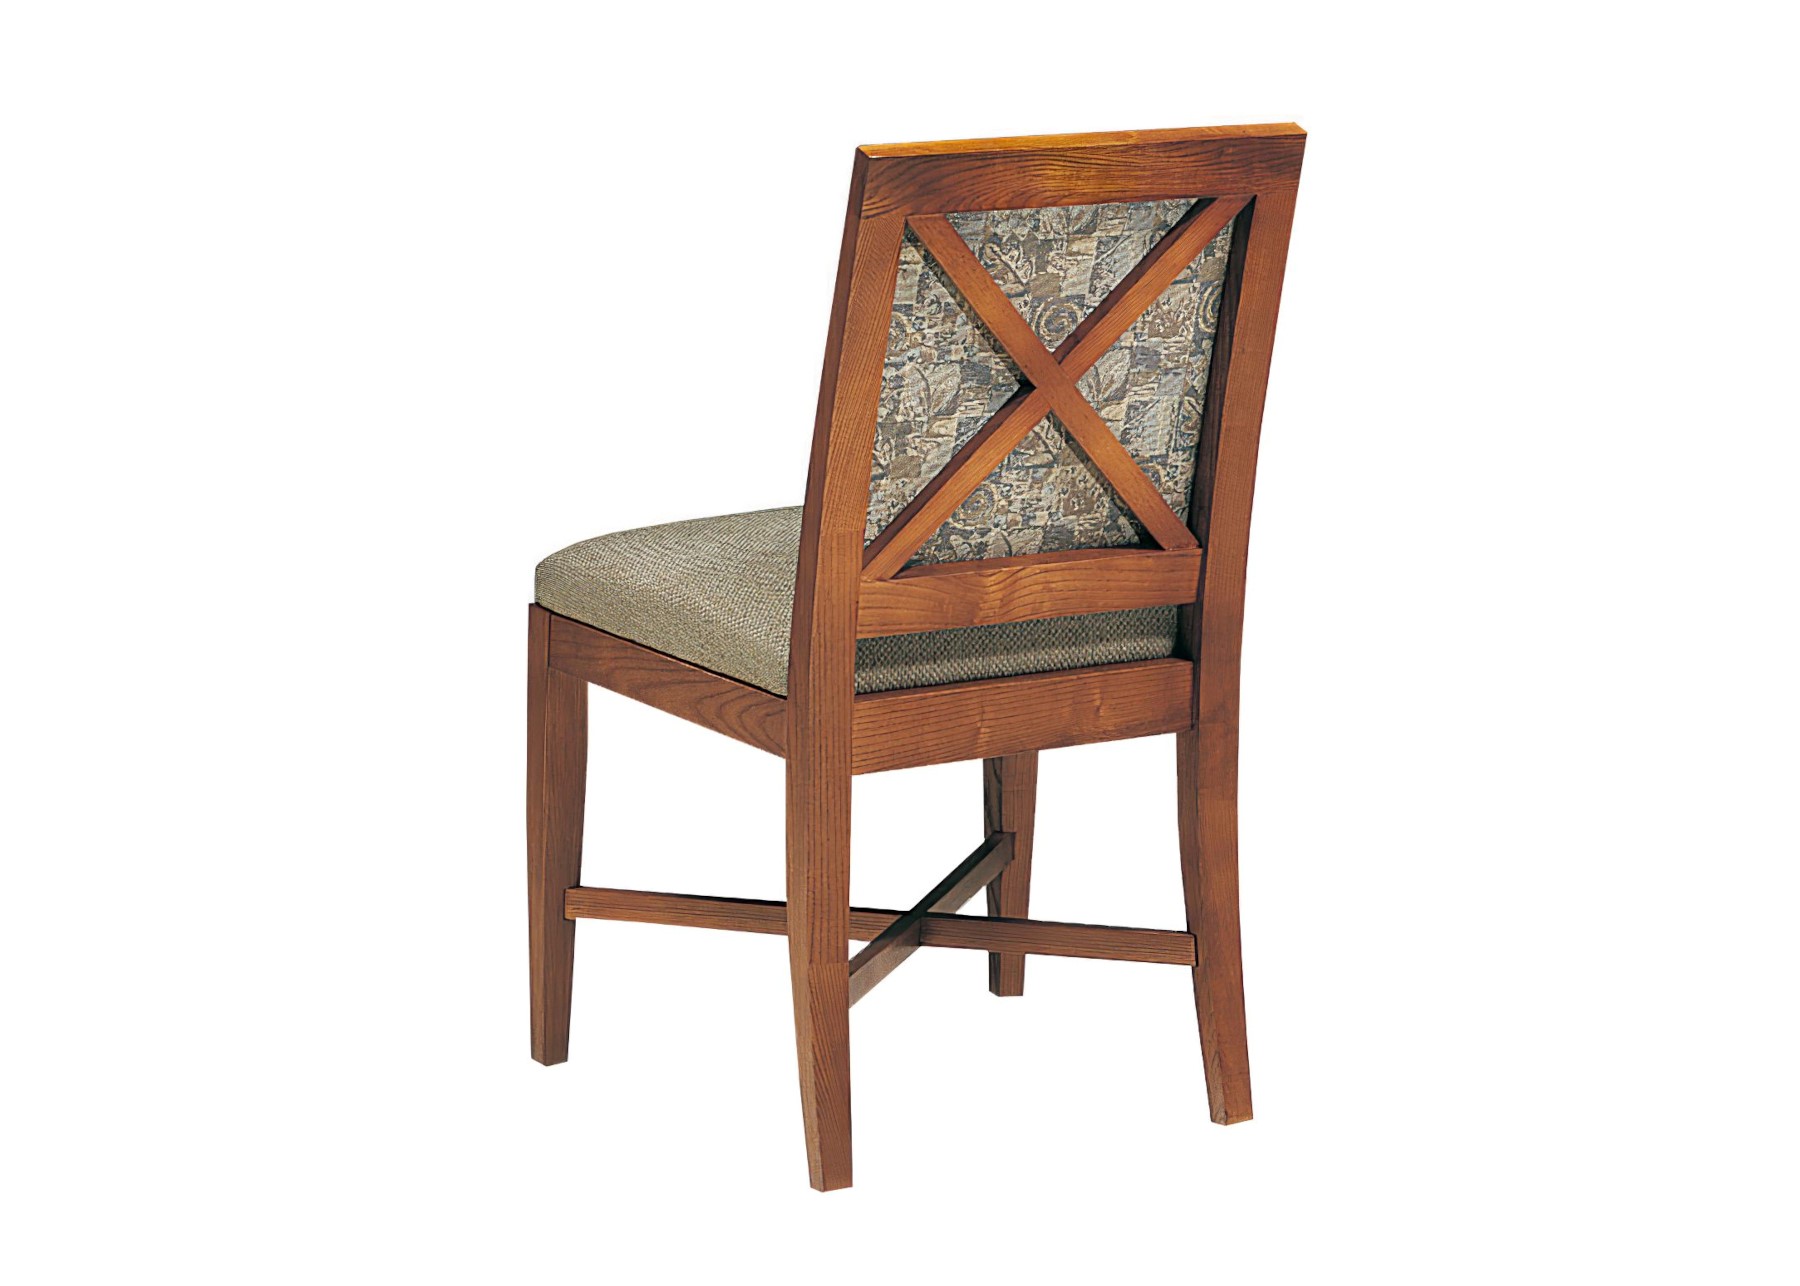  VOYAGE SIDE CHAIR